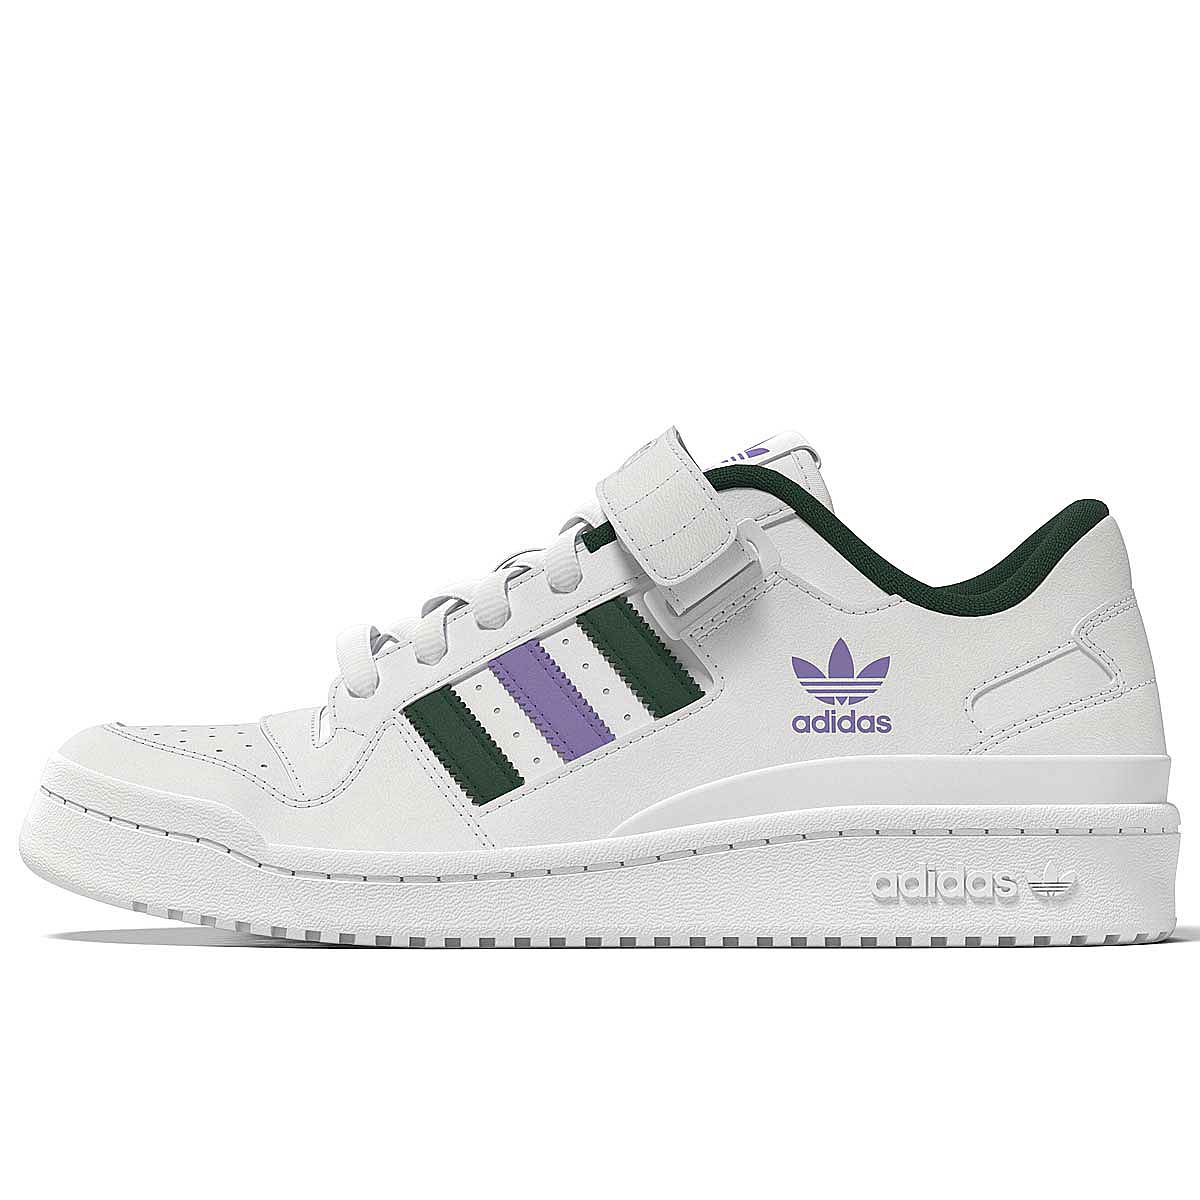 Image of Adidas Forum Low W, Ftwwht/gretwo/owhite